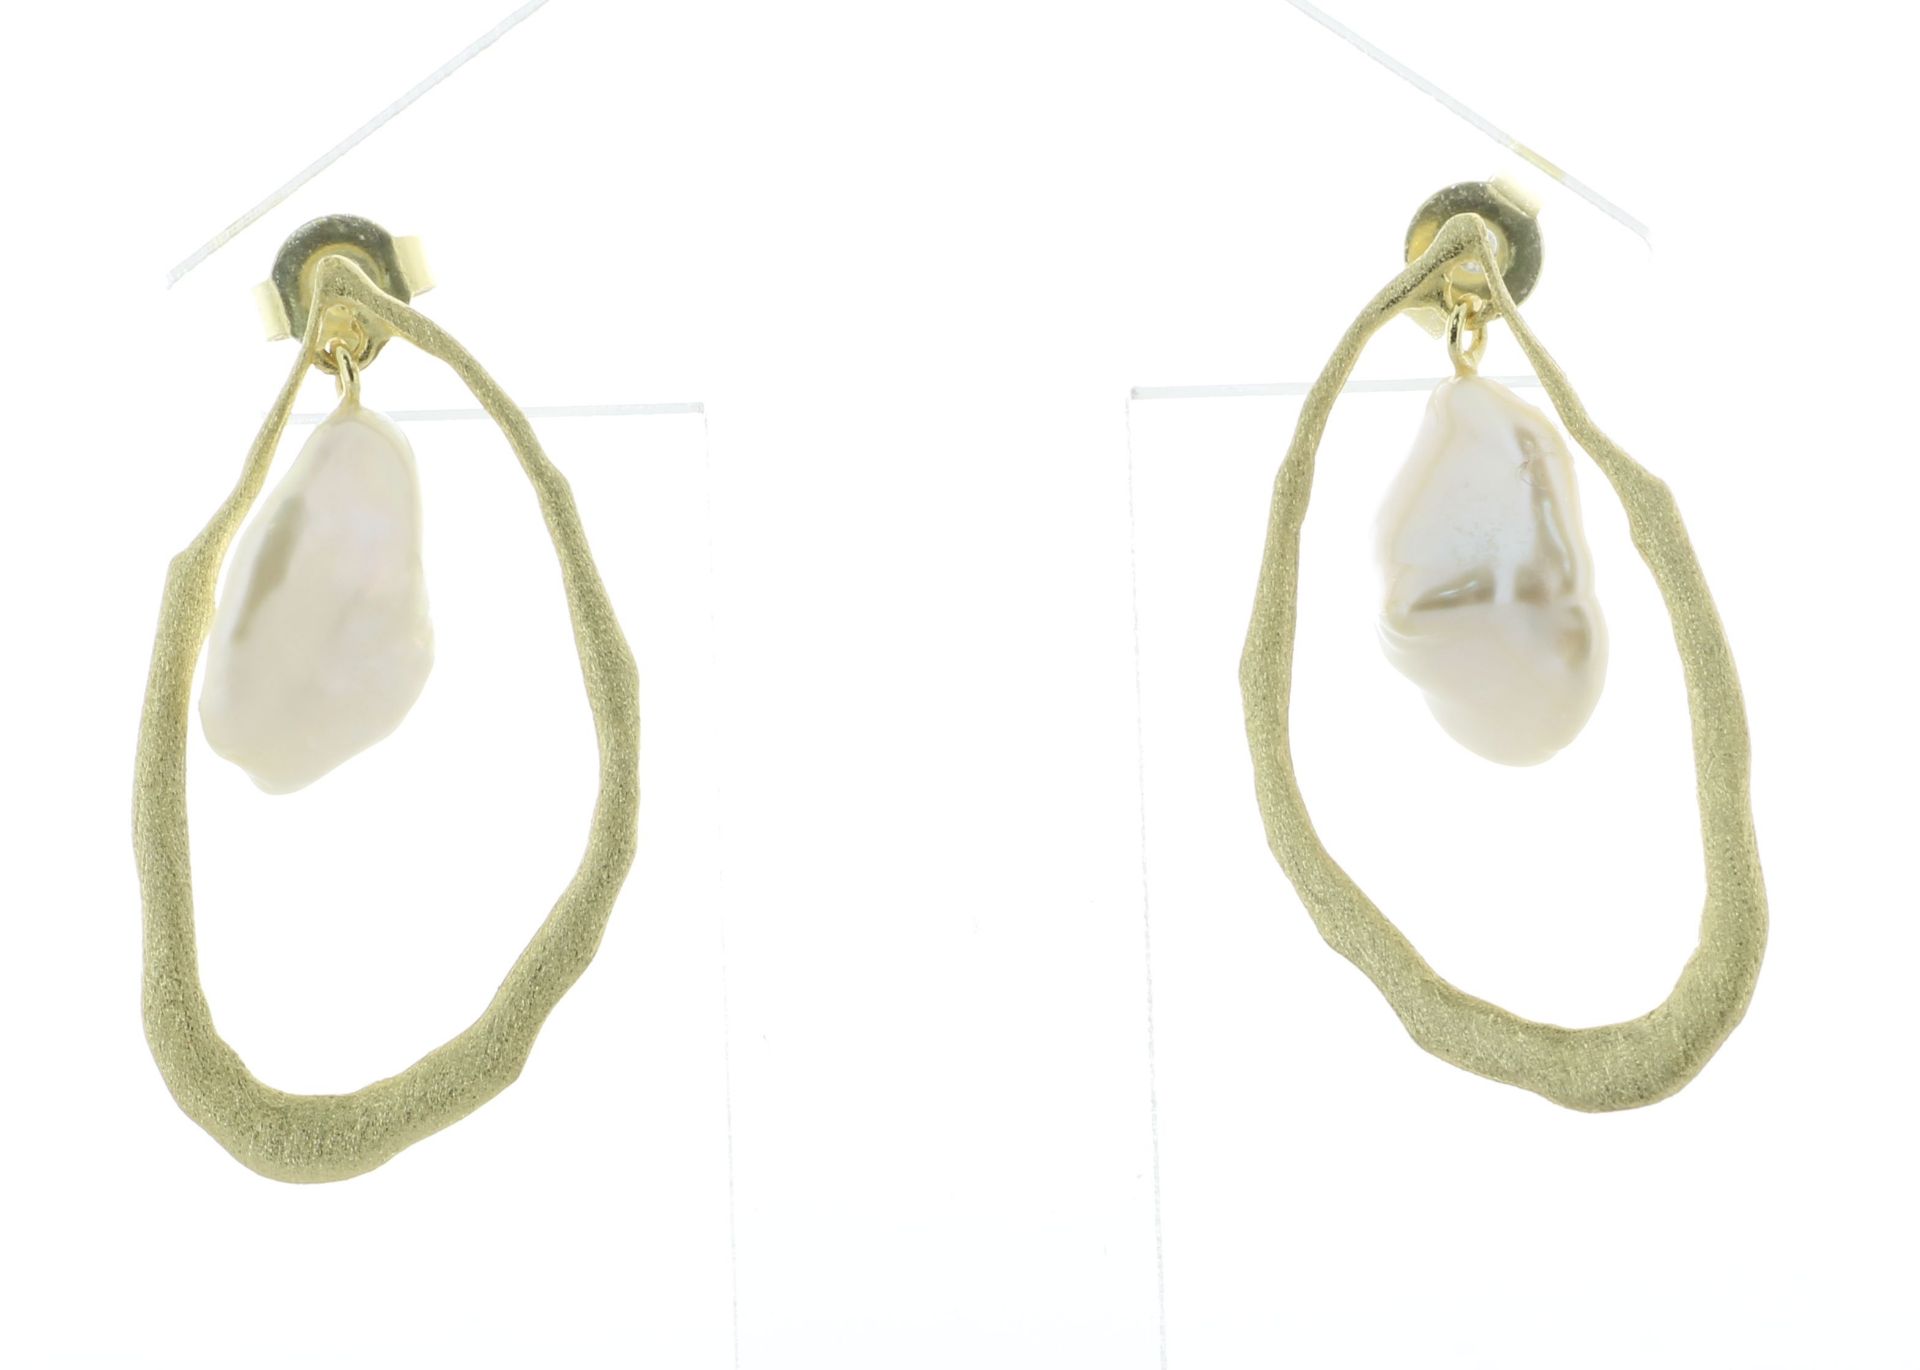 Gold Plated Silver Freshwater Cultured Pearl Earrings - Valued By AGI £315.00 - Gold plated silver